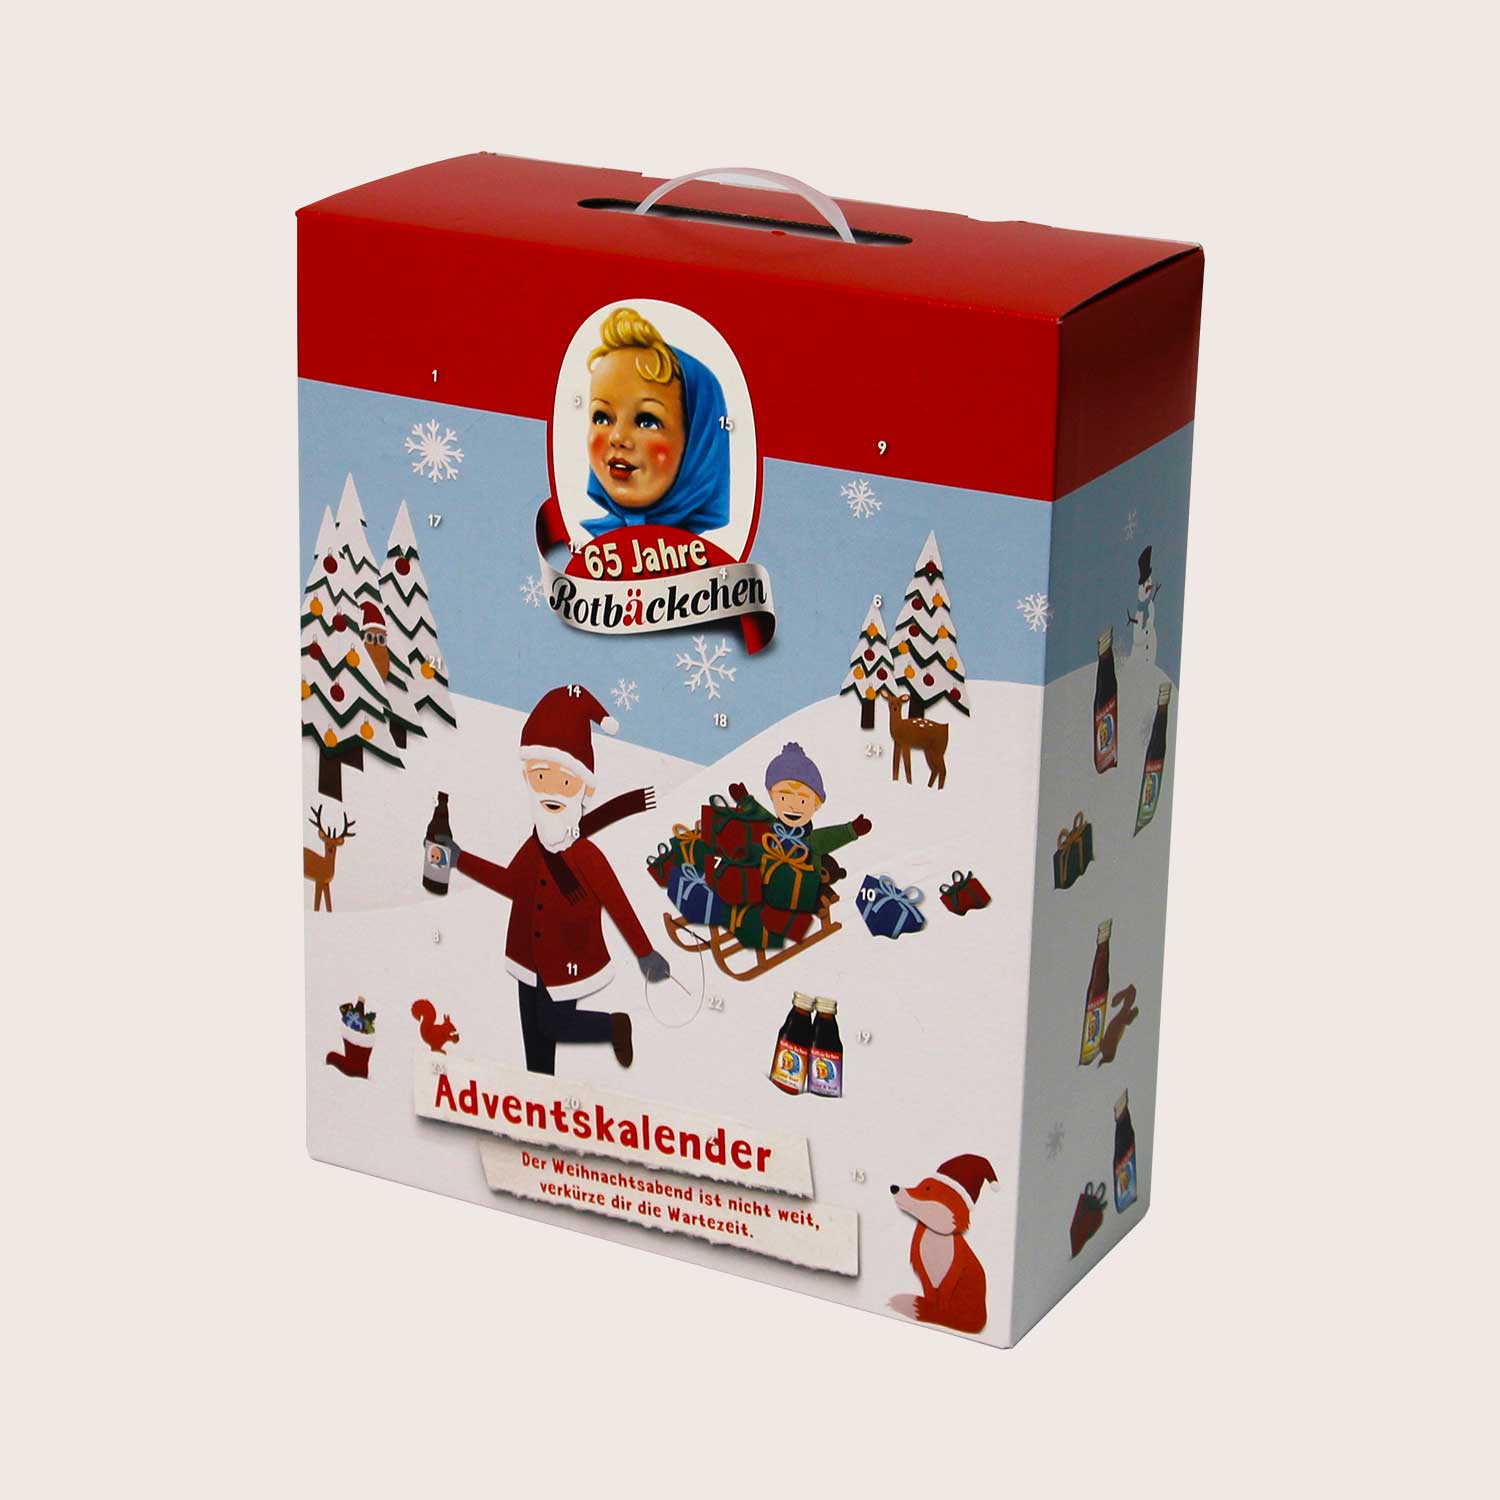 Advent calendar as product packaging